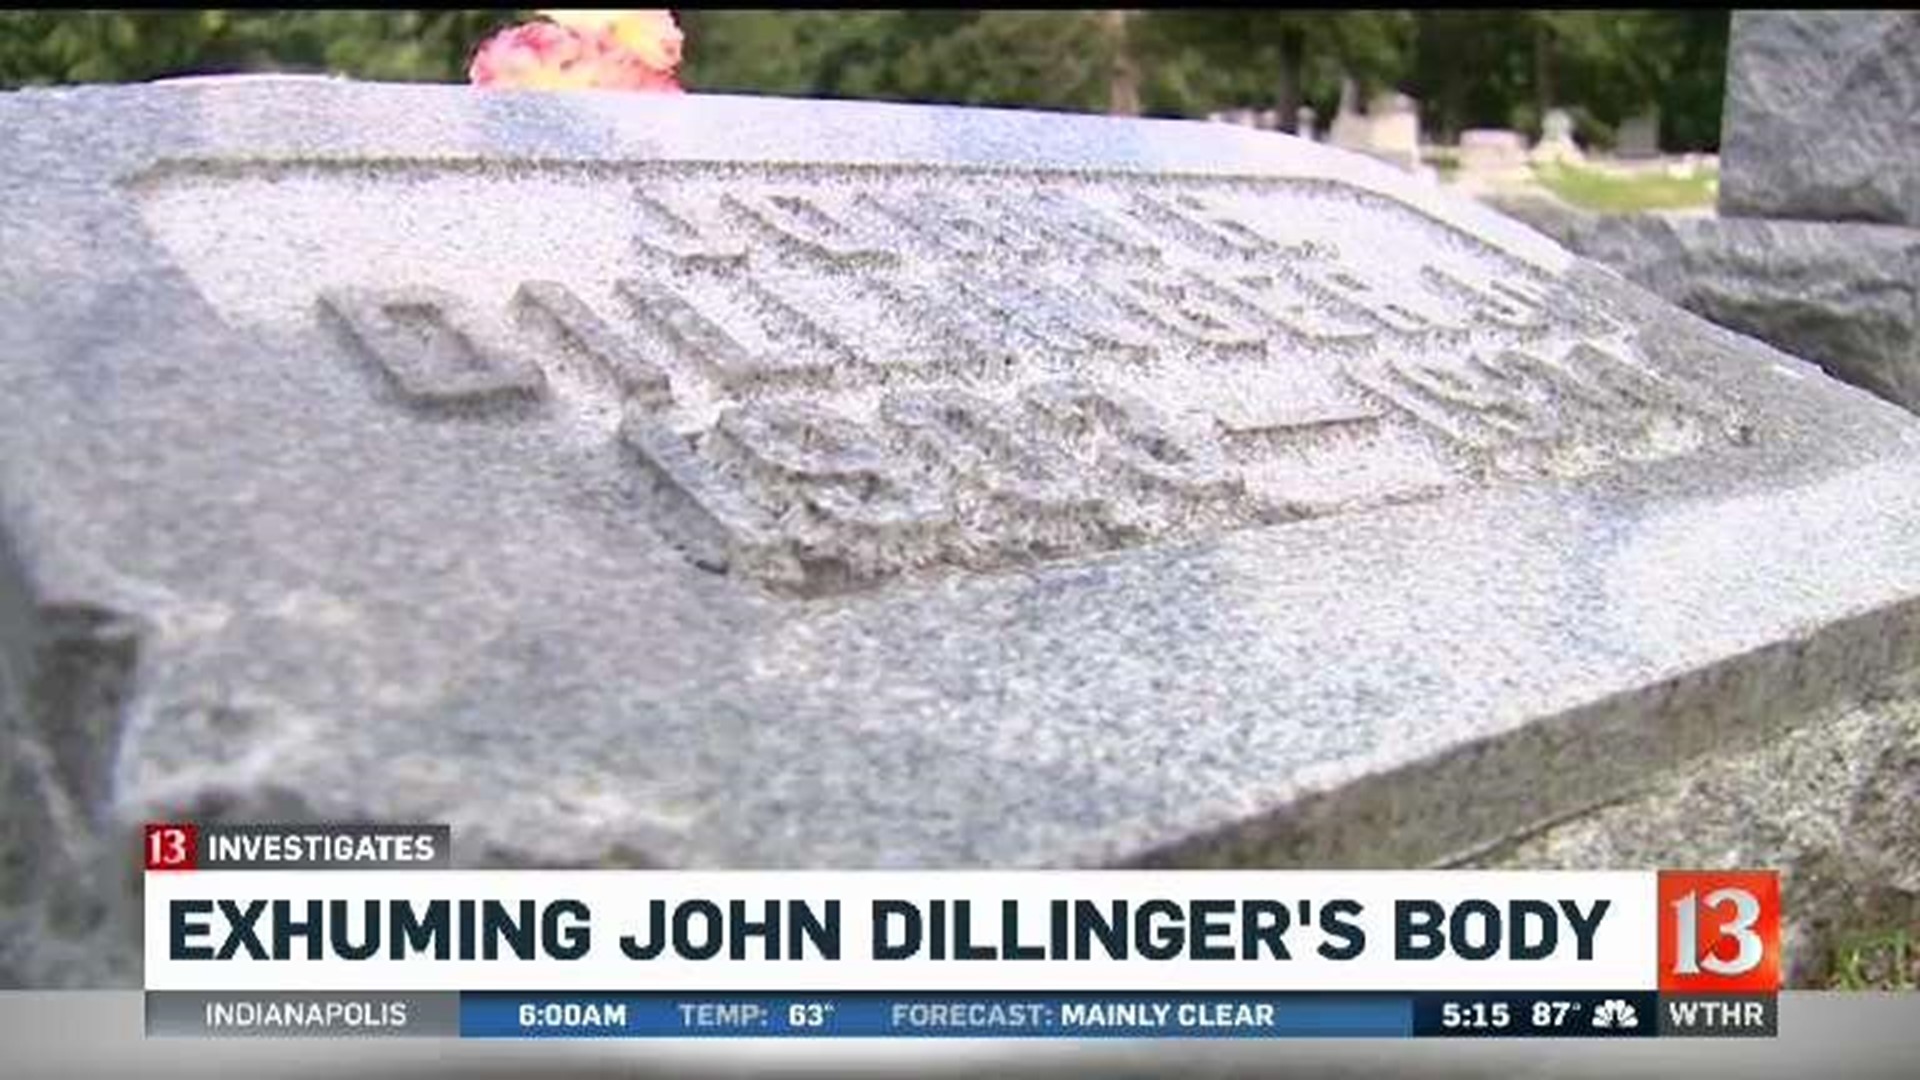 Dillinger exhumation scheduled